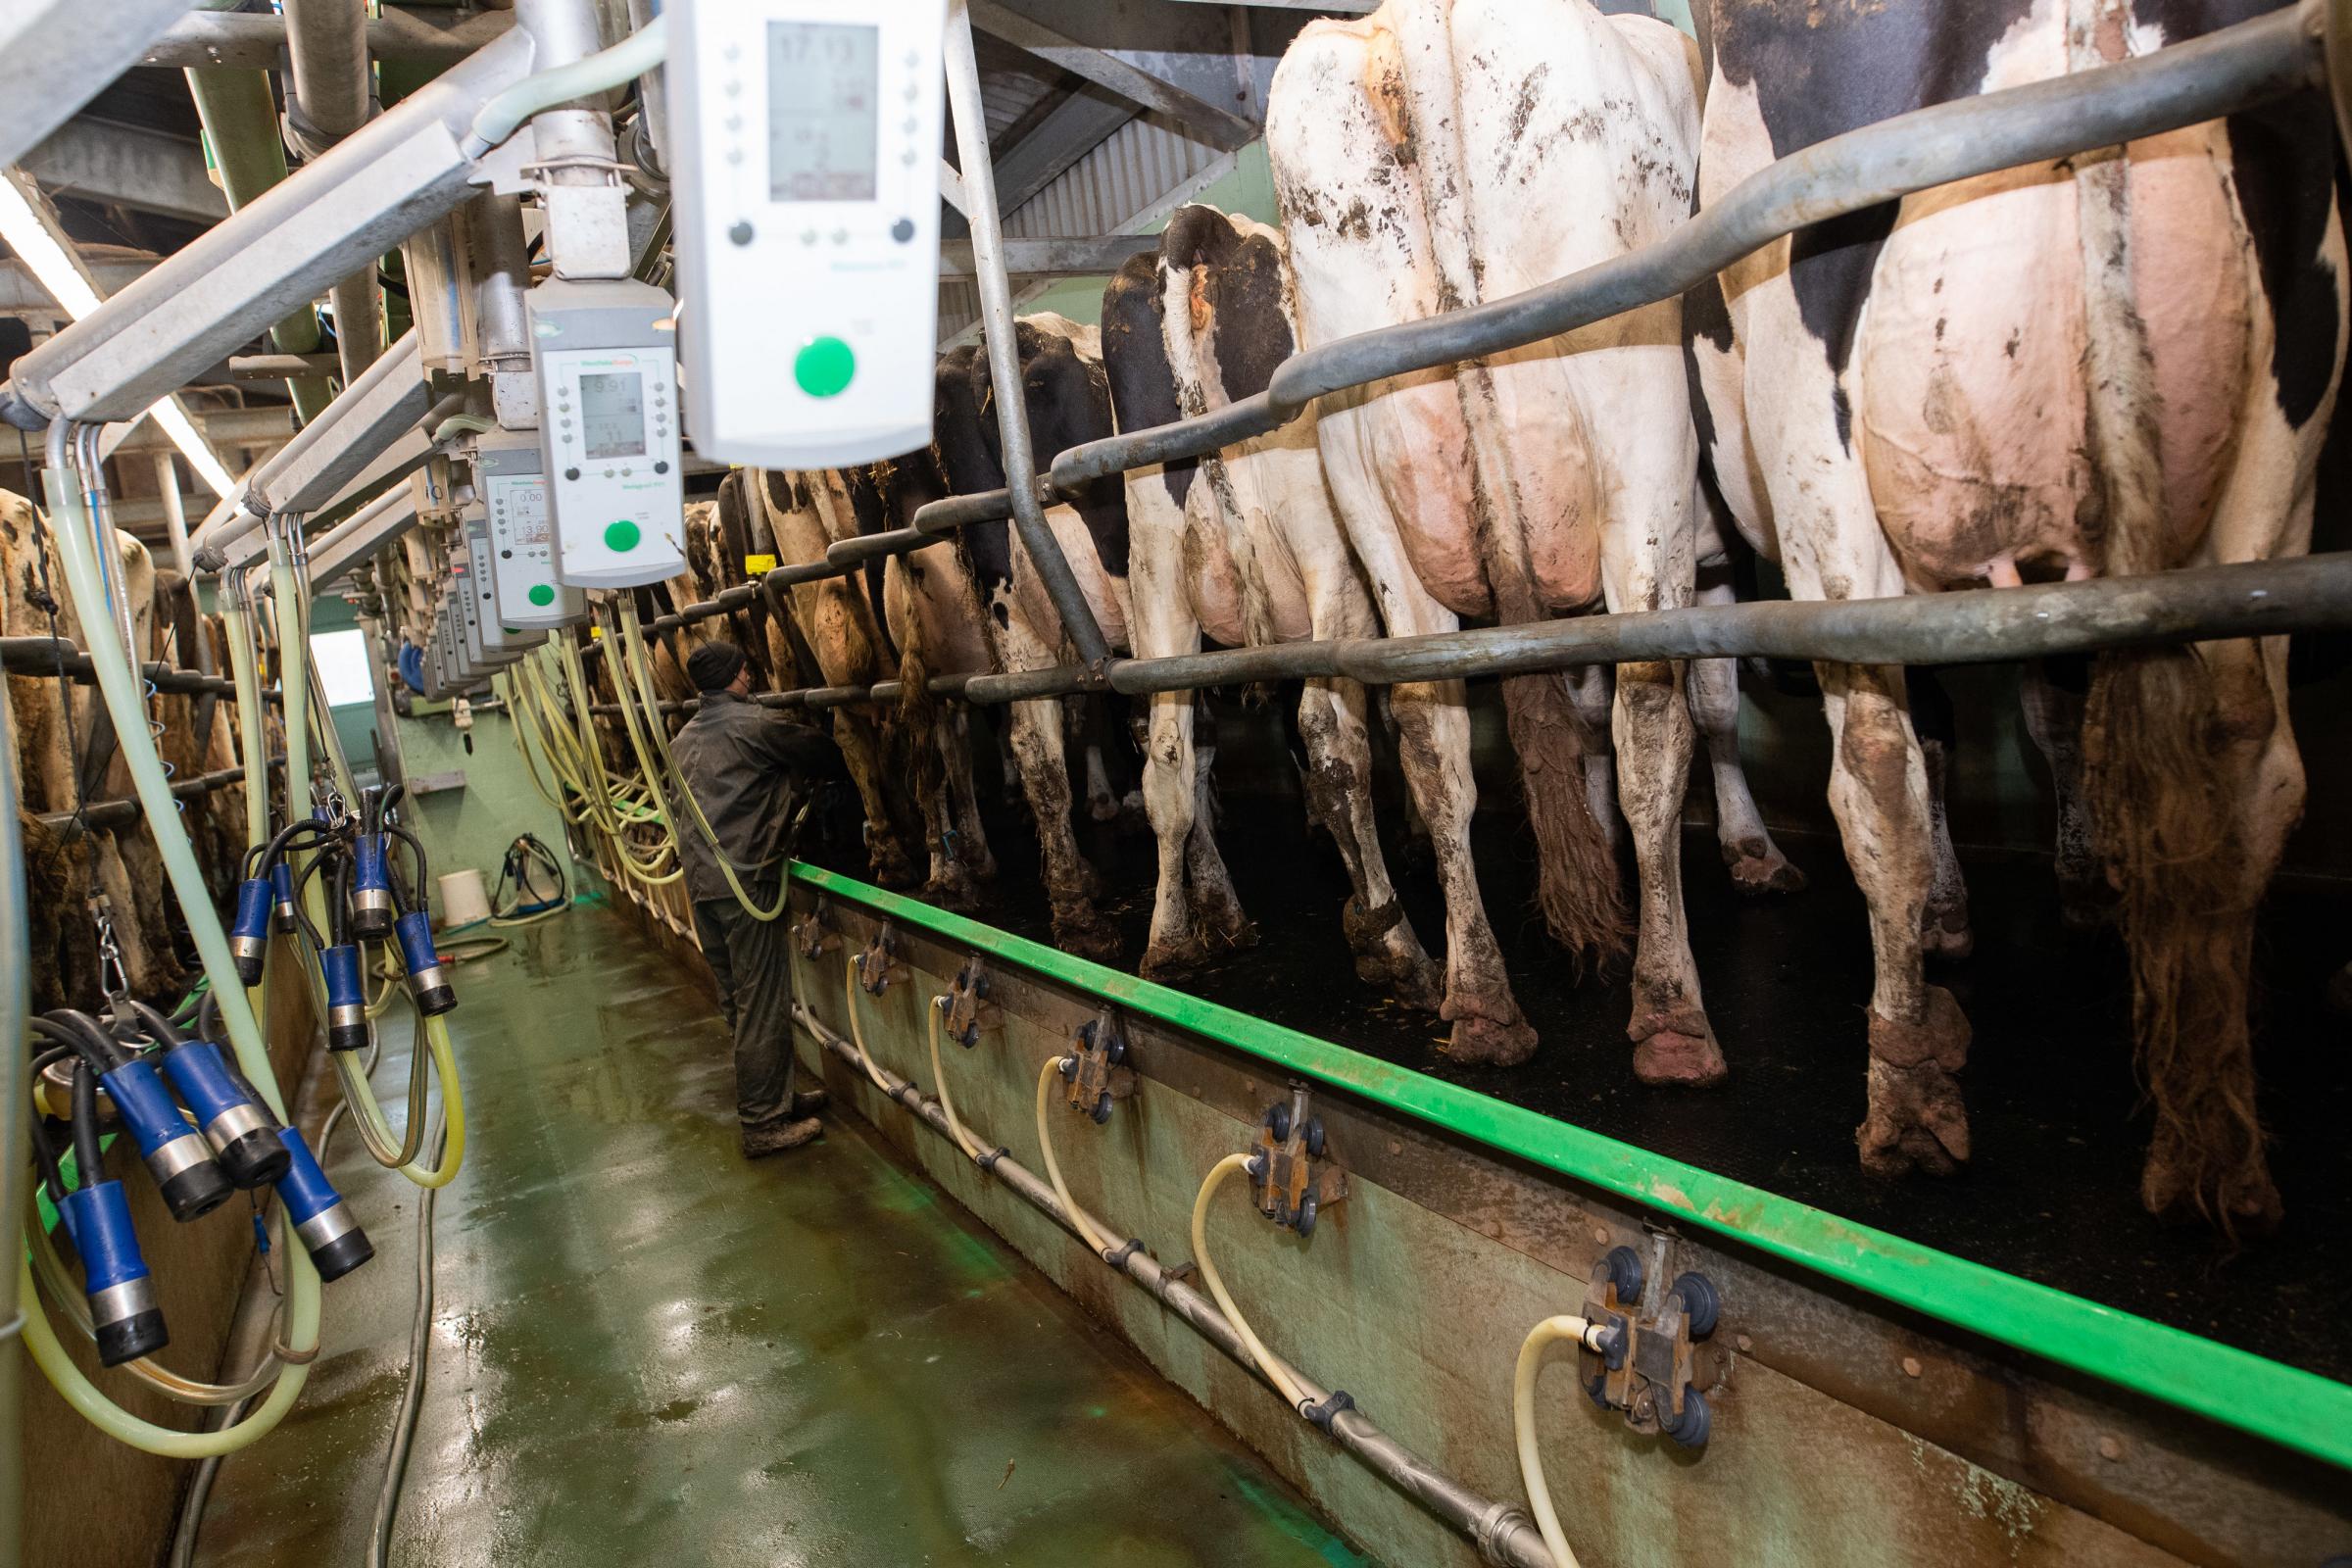  the cows go throught a 20:40 swing over parlour three times a day Ref:RH030321535 Rob Haining / The Scottish Farmer...